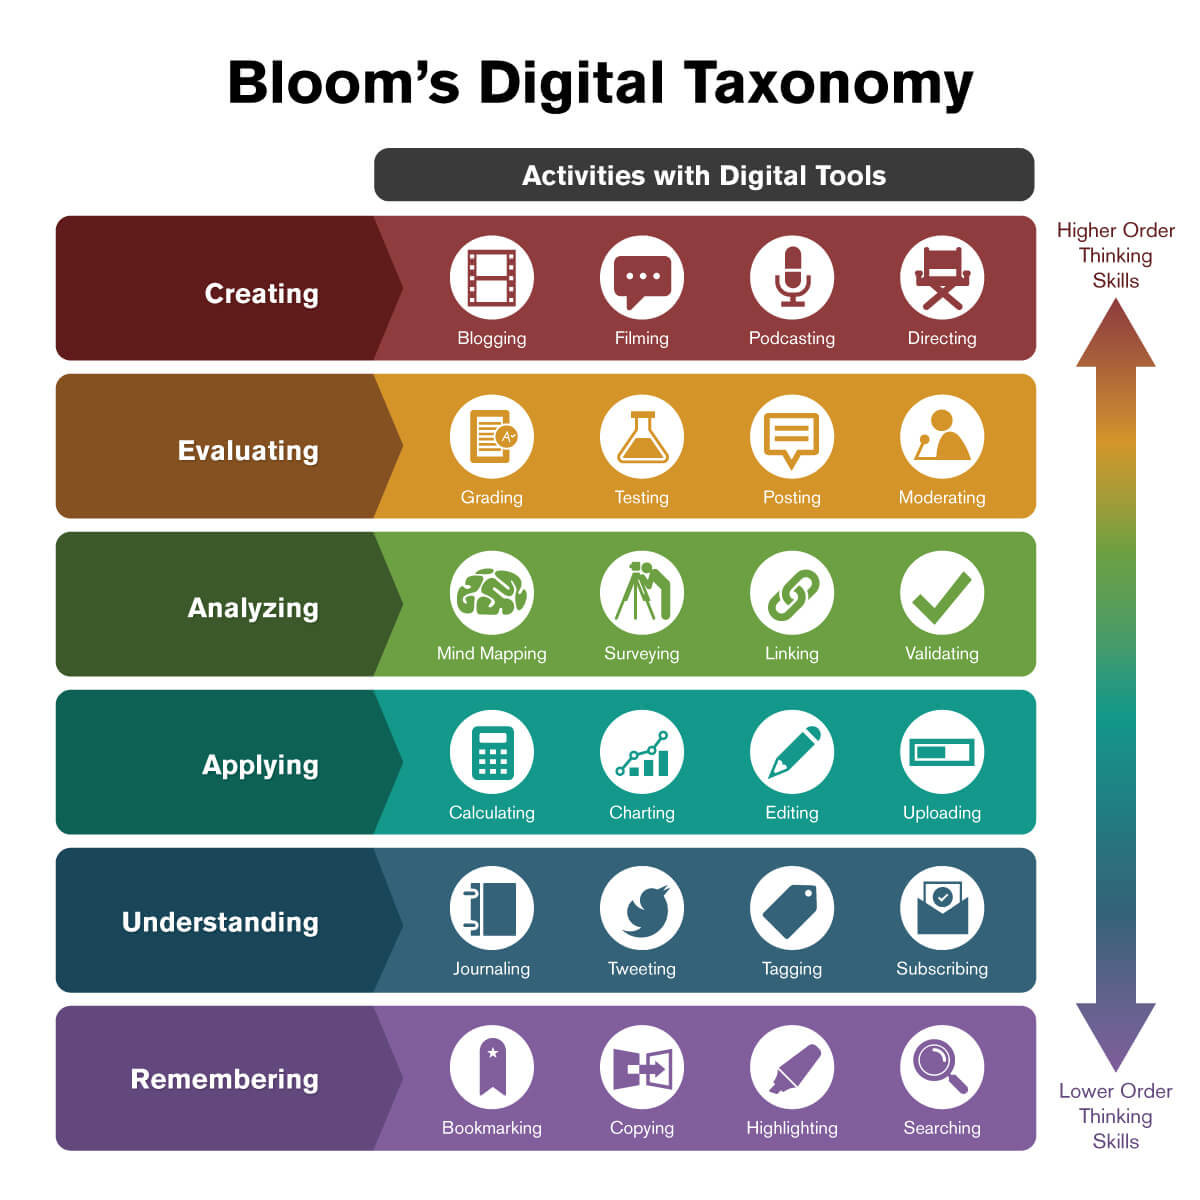 Bloom's Digital Taxomonmy chart deveoped by Andrew Church in 2007